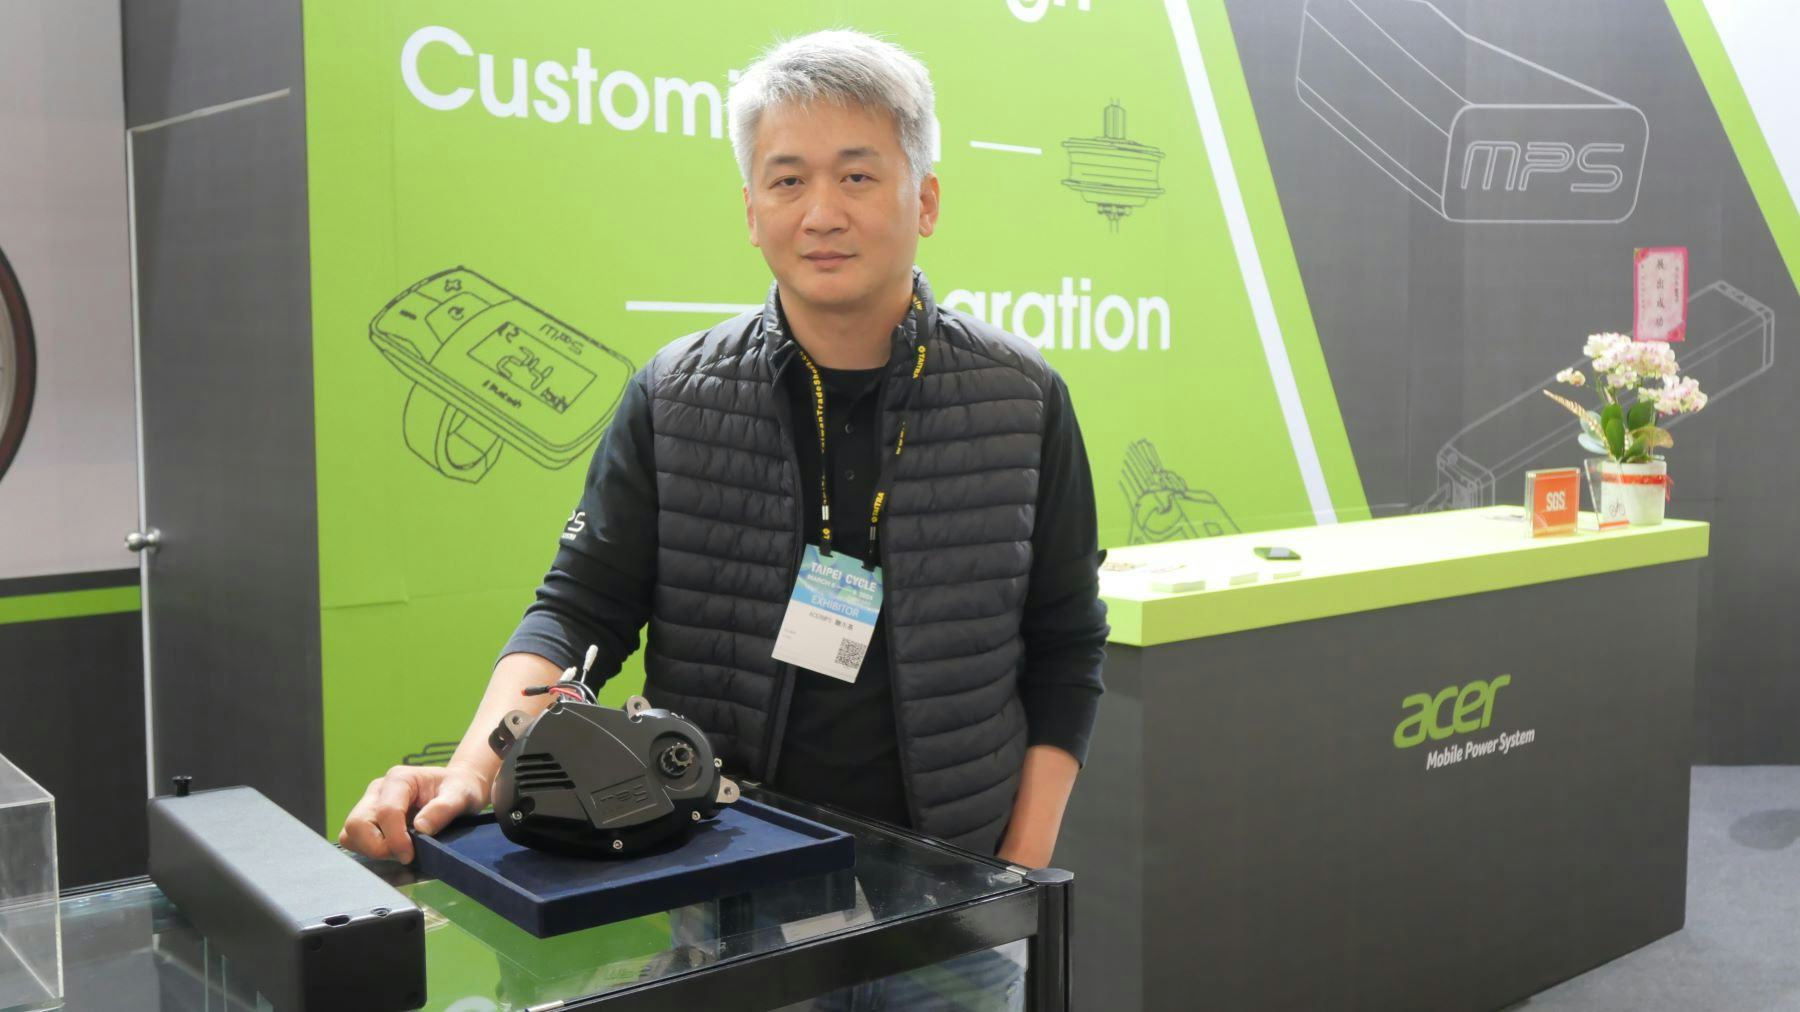 “We feel that some customers are starting to return and there will be market recovery in Q3 or Q4 of this year,” Acer MPC president Bryan Yeh told Bike Europe during this year’s Taipei Cycle show. - Photo Bike Europe